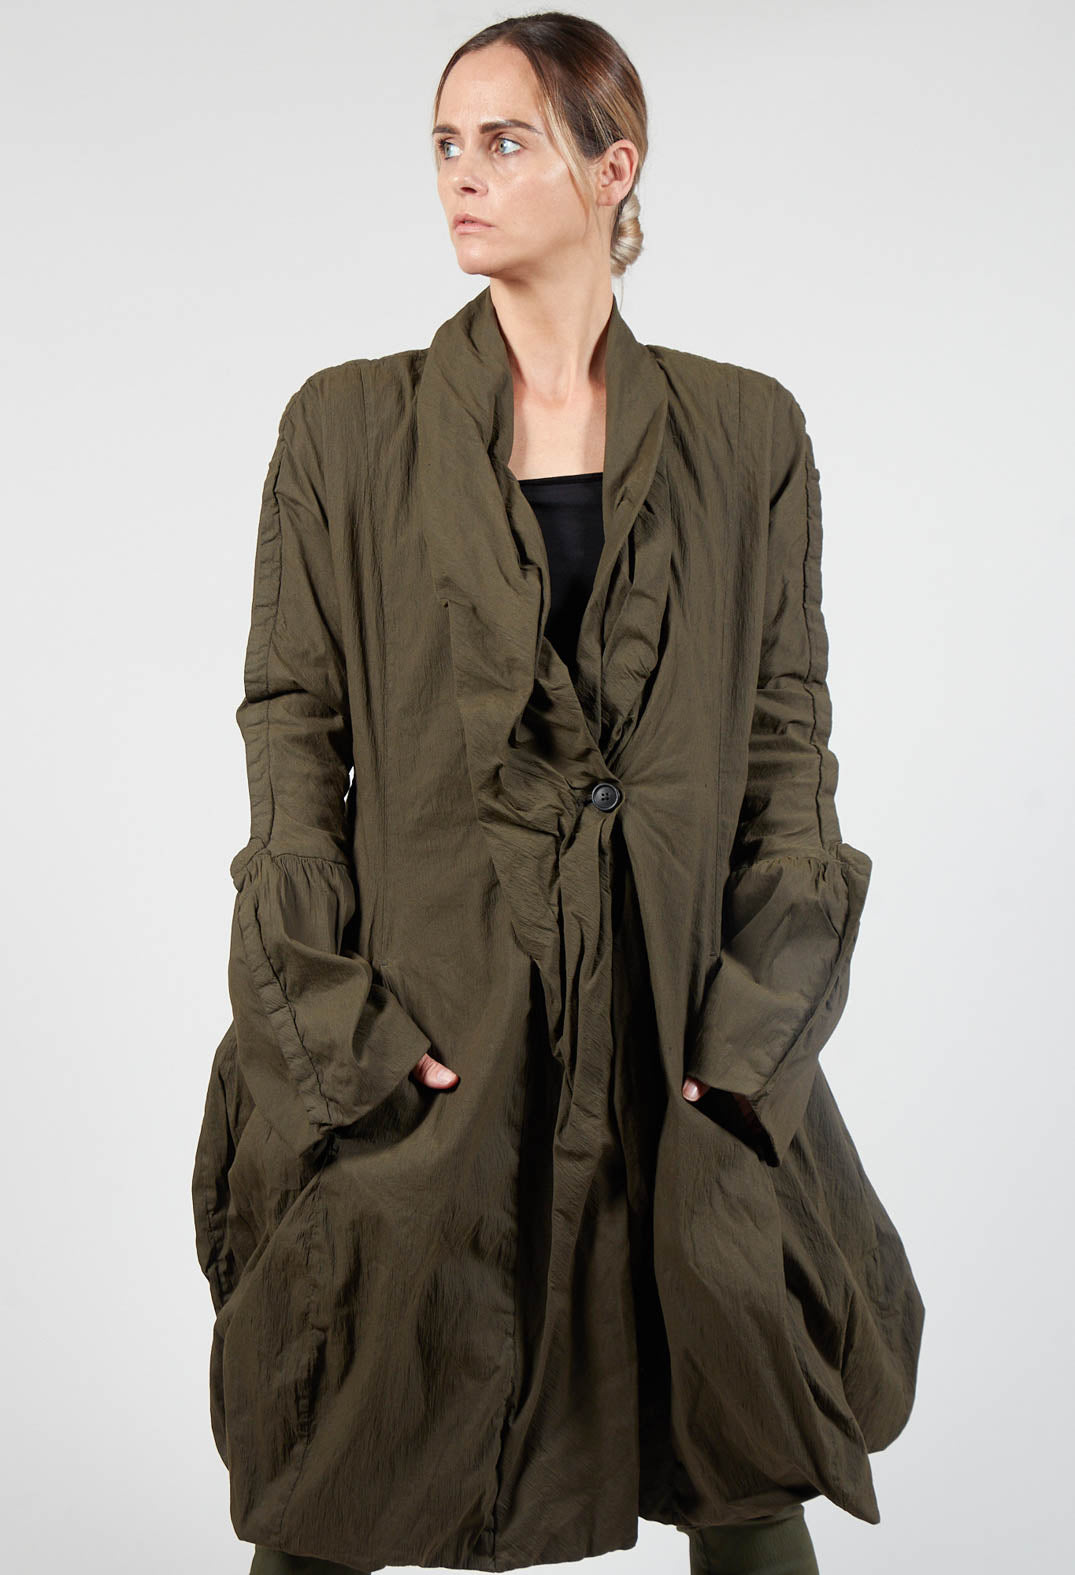 lady wearing a khaki coat with ruched fabric collar